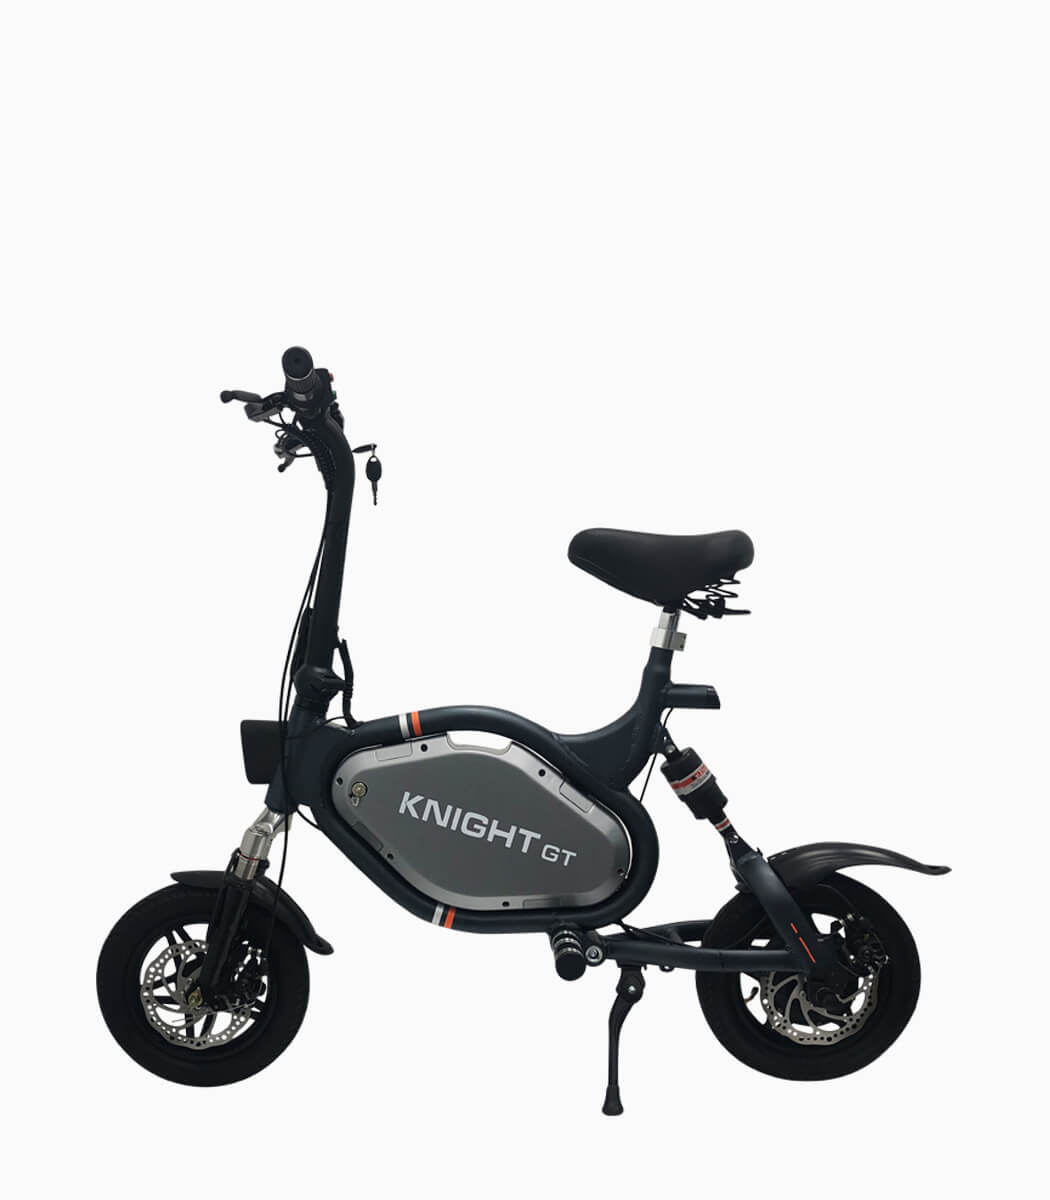 MOBOT KNIGHT GT (GREY10AH) UL2272 certified e-scooter left